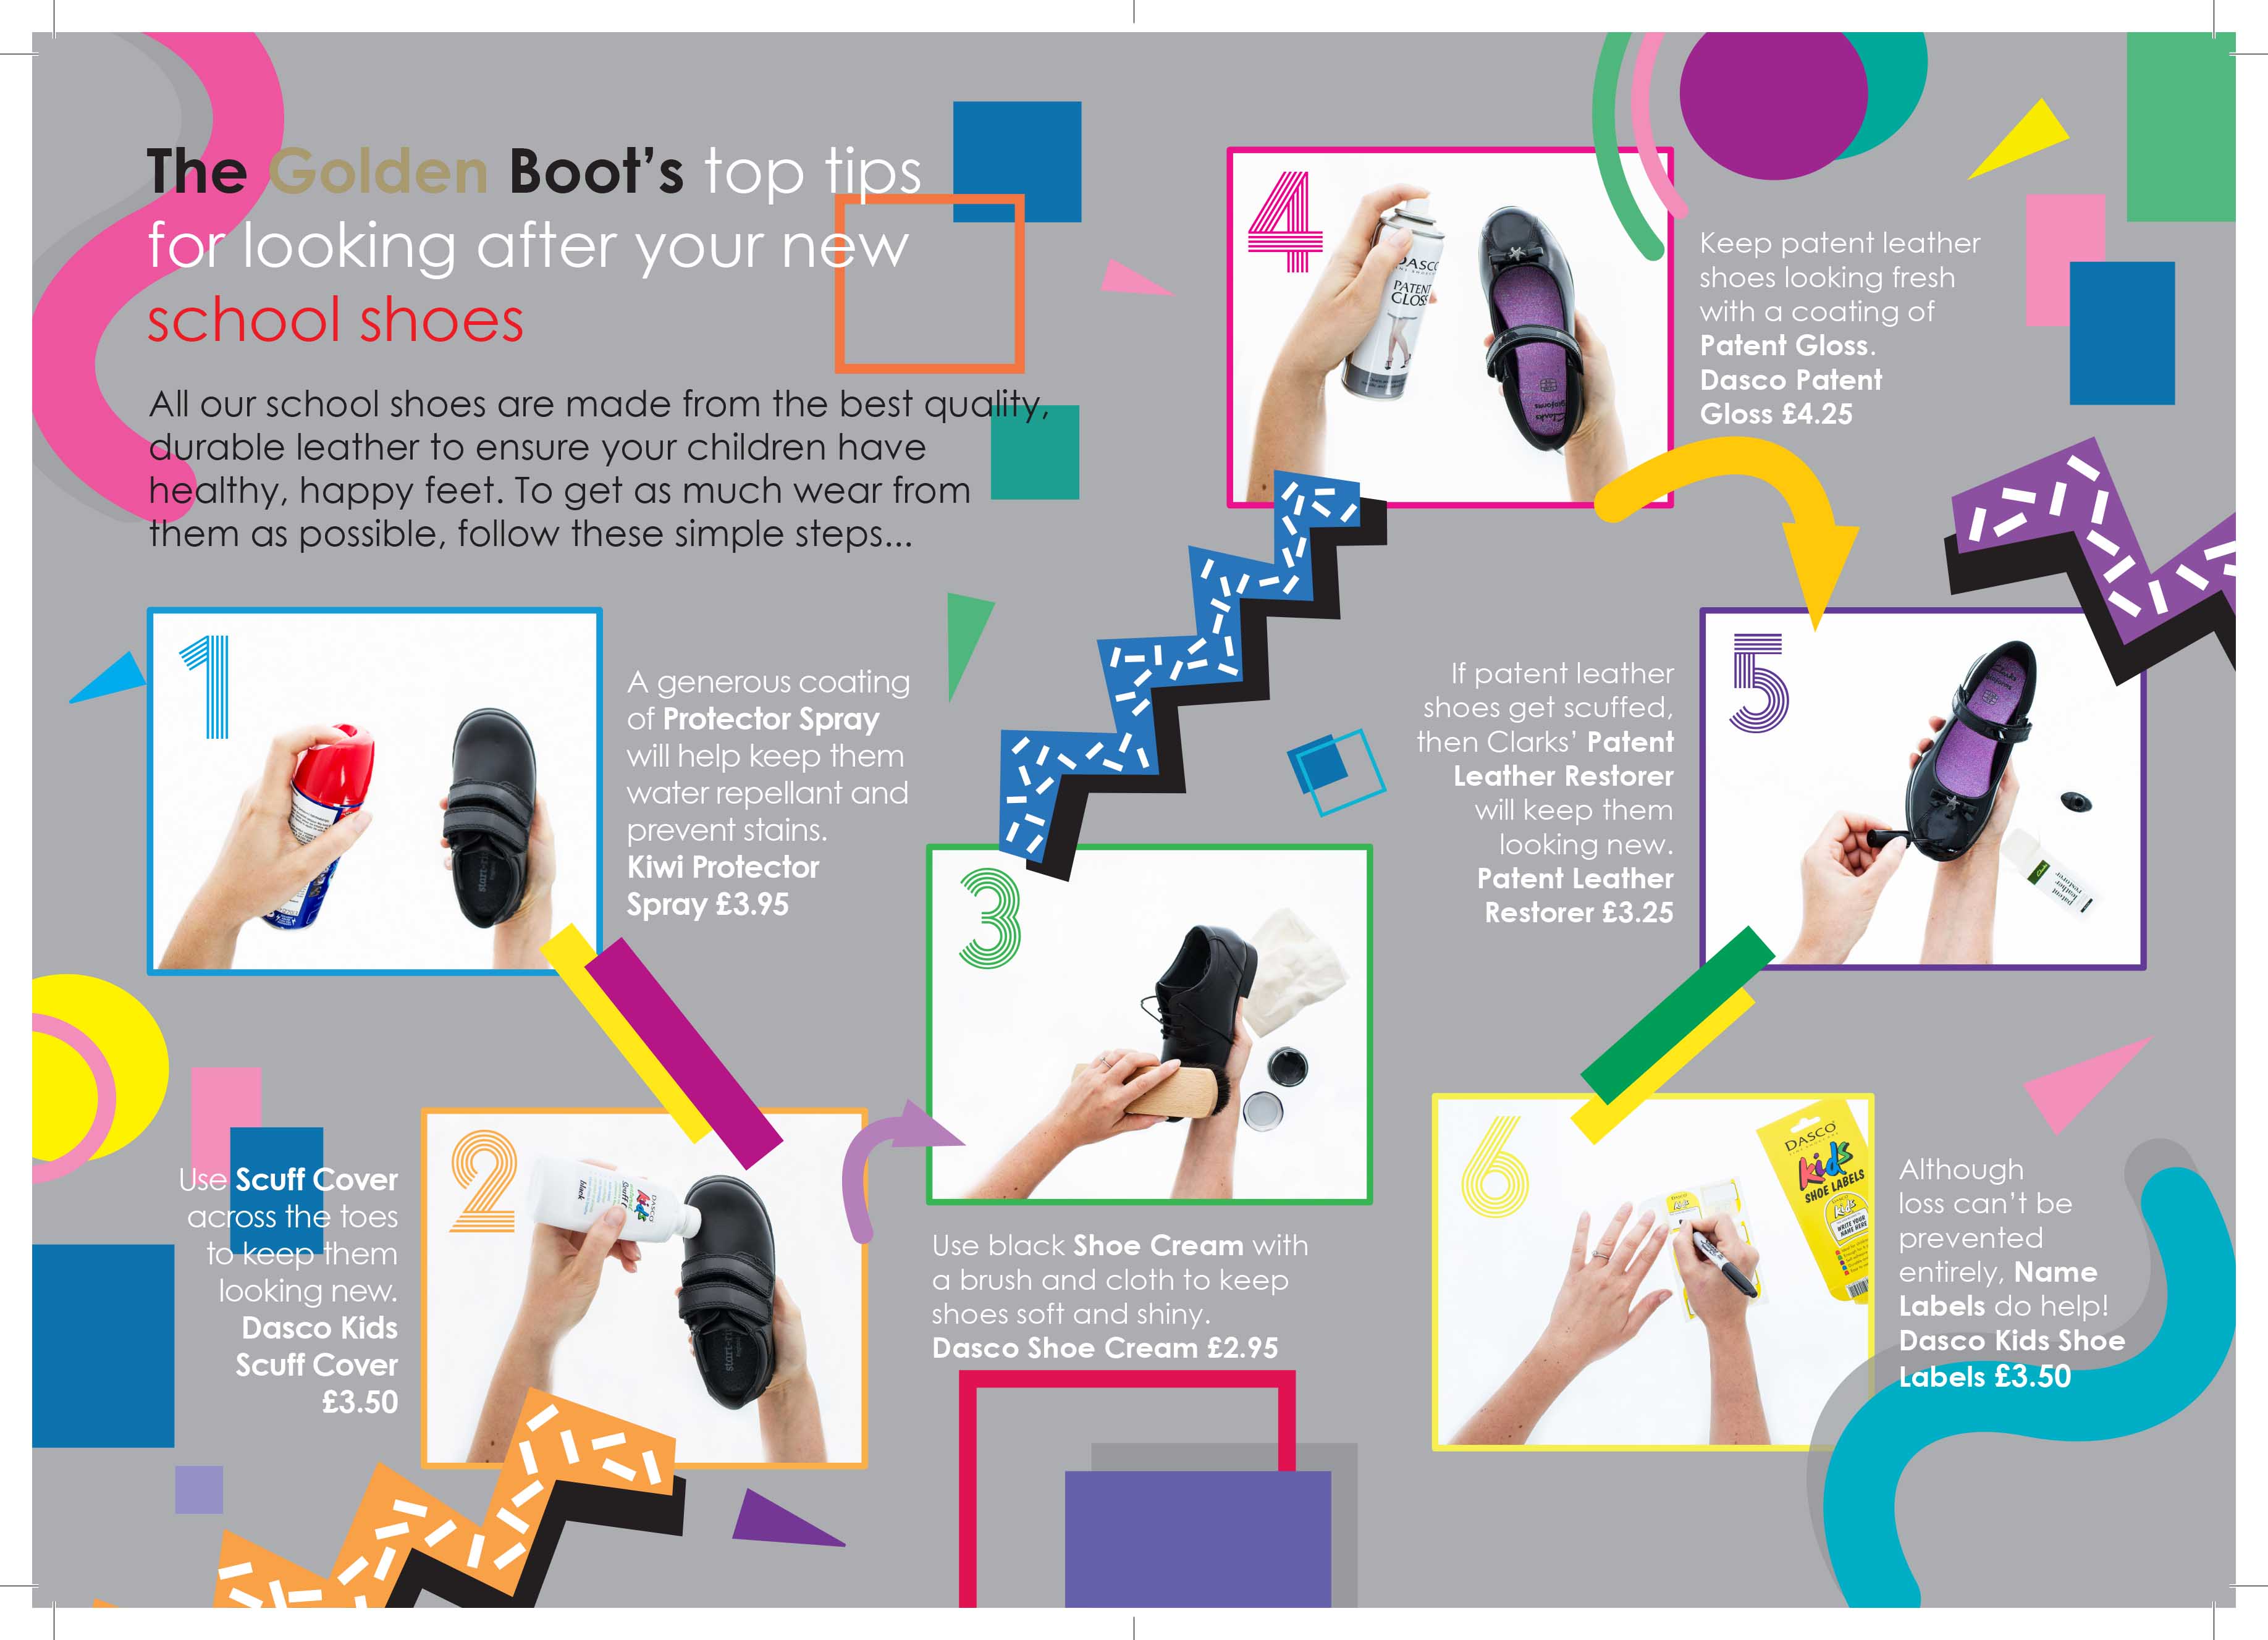 Top tips for looking after School Shoes!